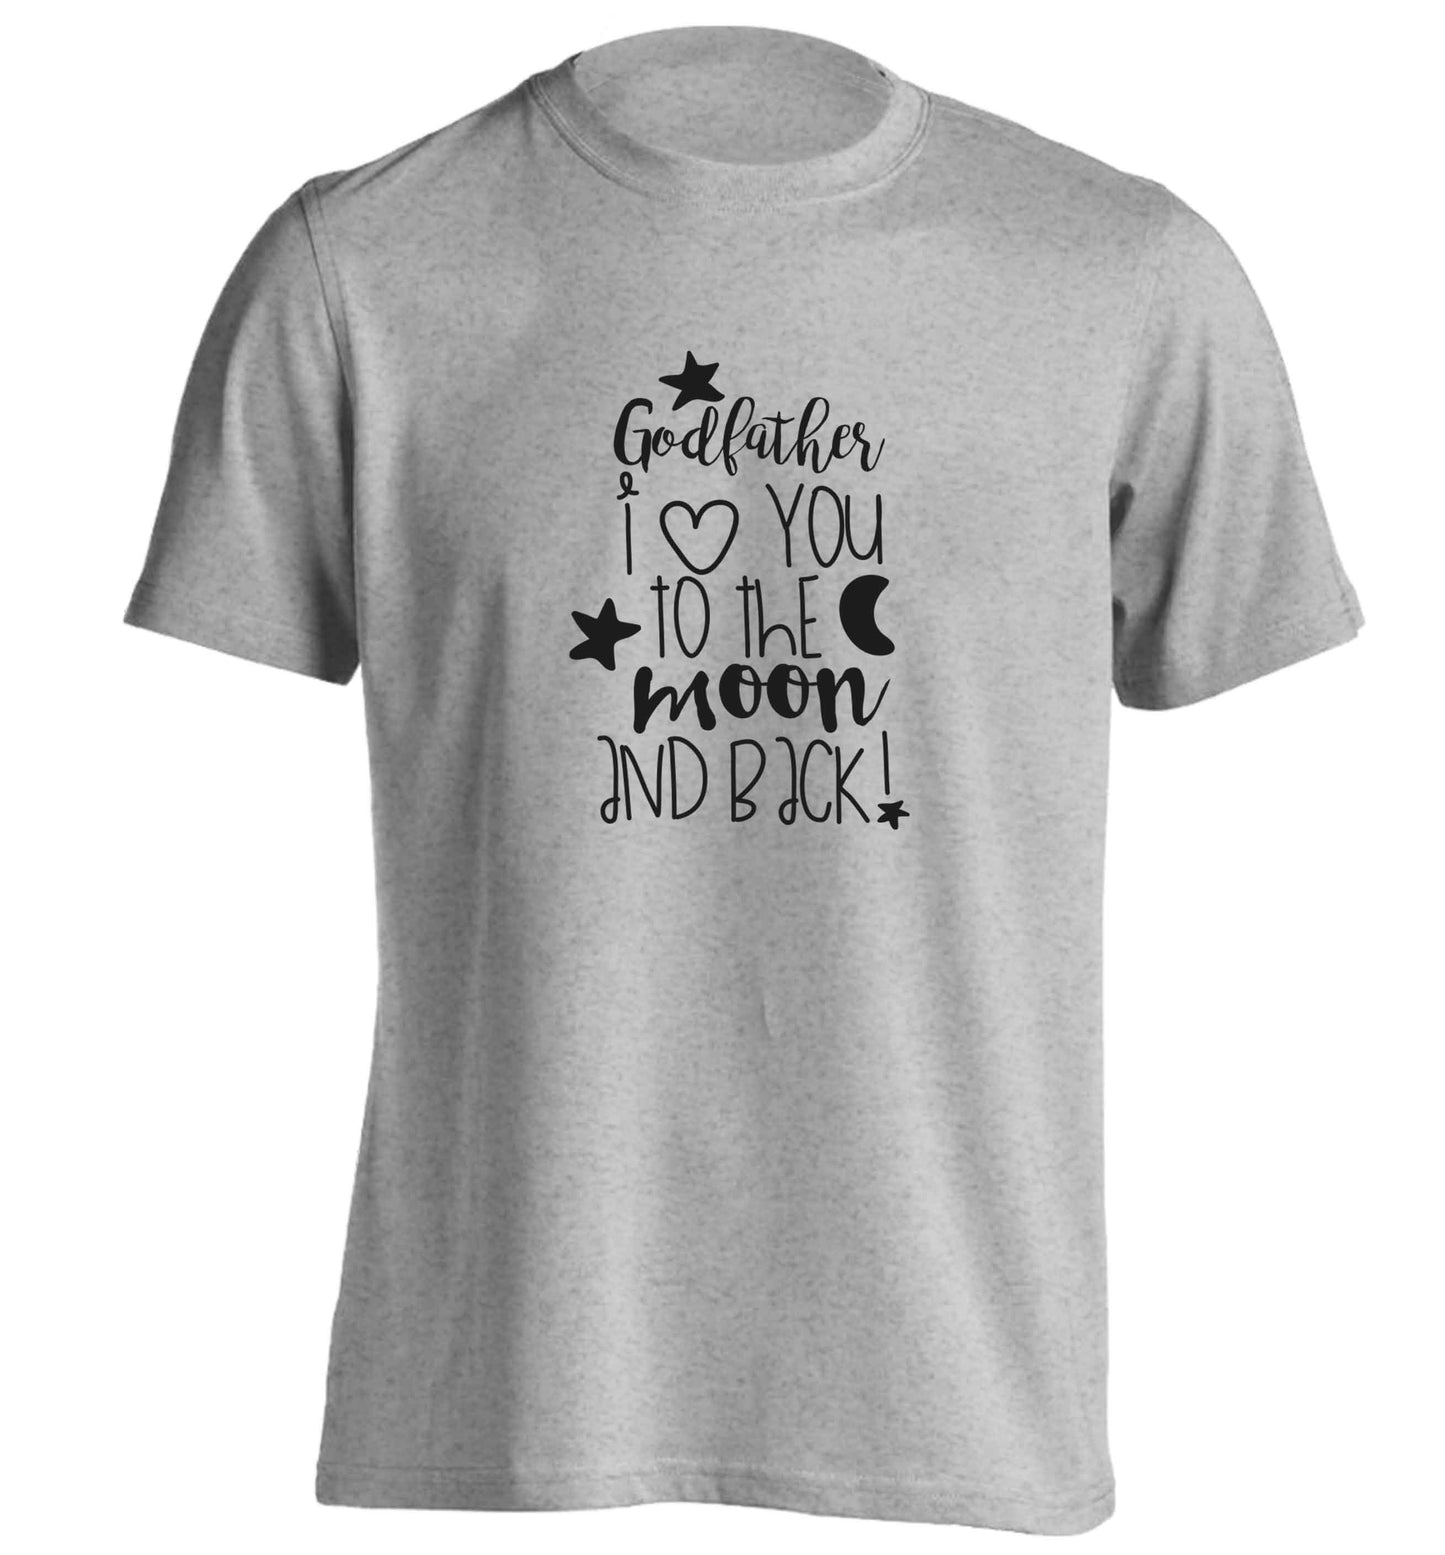 Godfather I love you to the moon and back adults unisex grey Tshirt 2XL